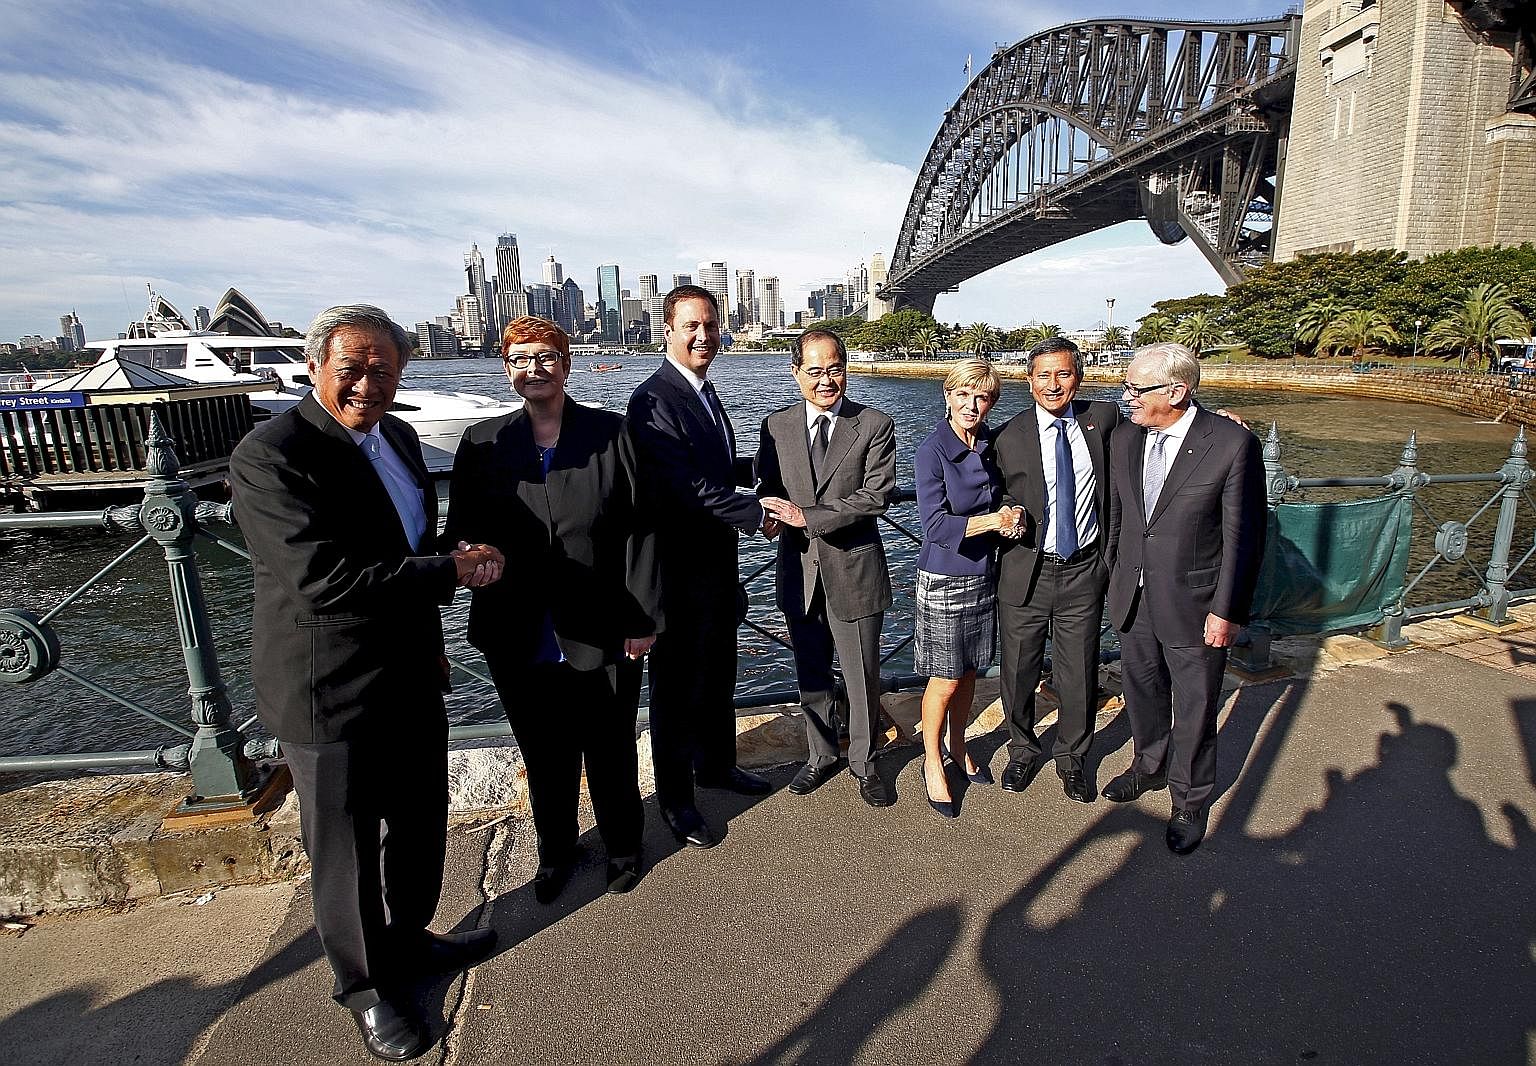 (From far left) Singapore Defence Minister Ng Eng Hen, Australian Defence Minister Marise Payne, Australian Trade Minister Steven Ciobo, Singapore Trade and Industry Minister Lim Hng Kiang, Australian Foreign Minister Julie Bishop, Singapore Foreign 